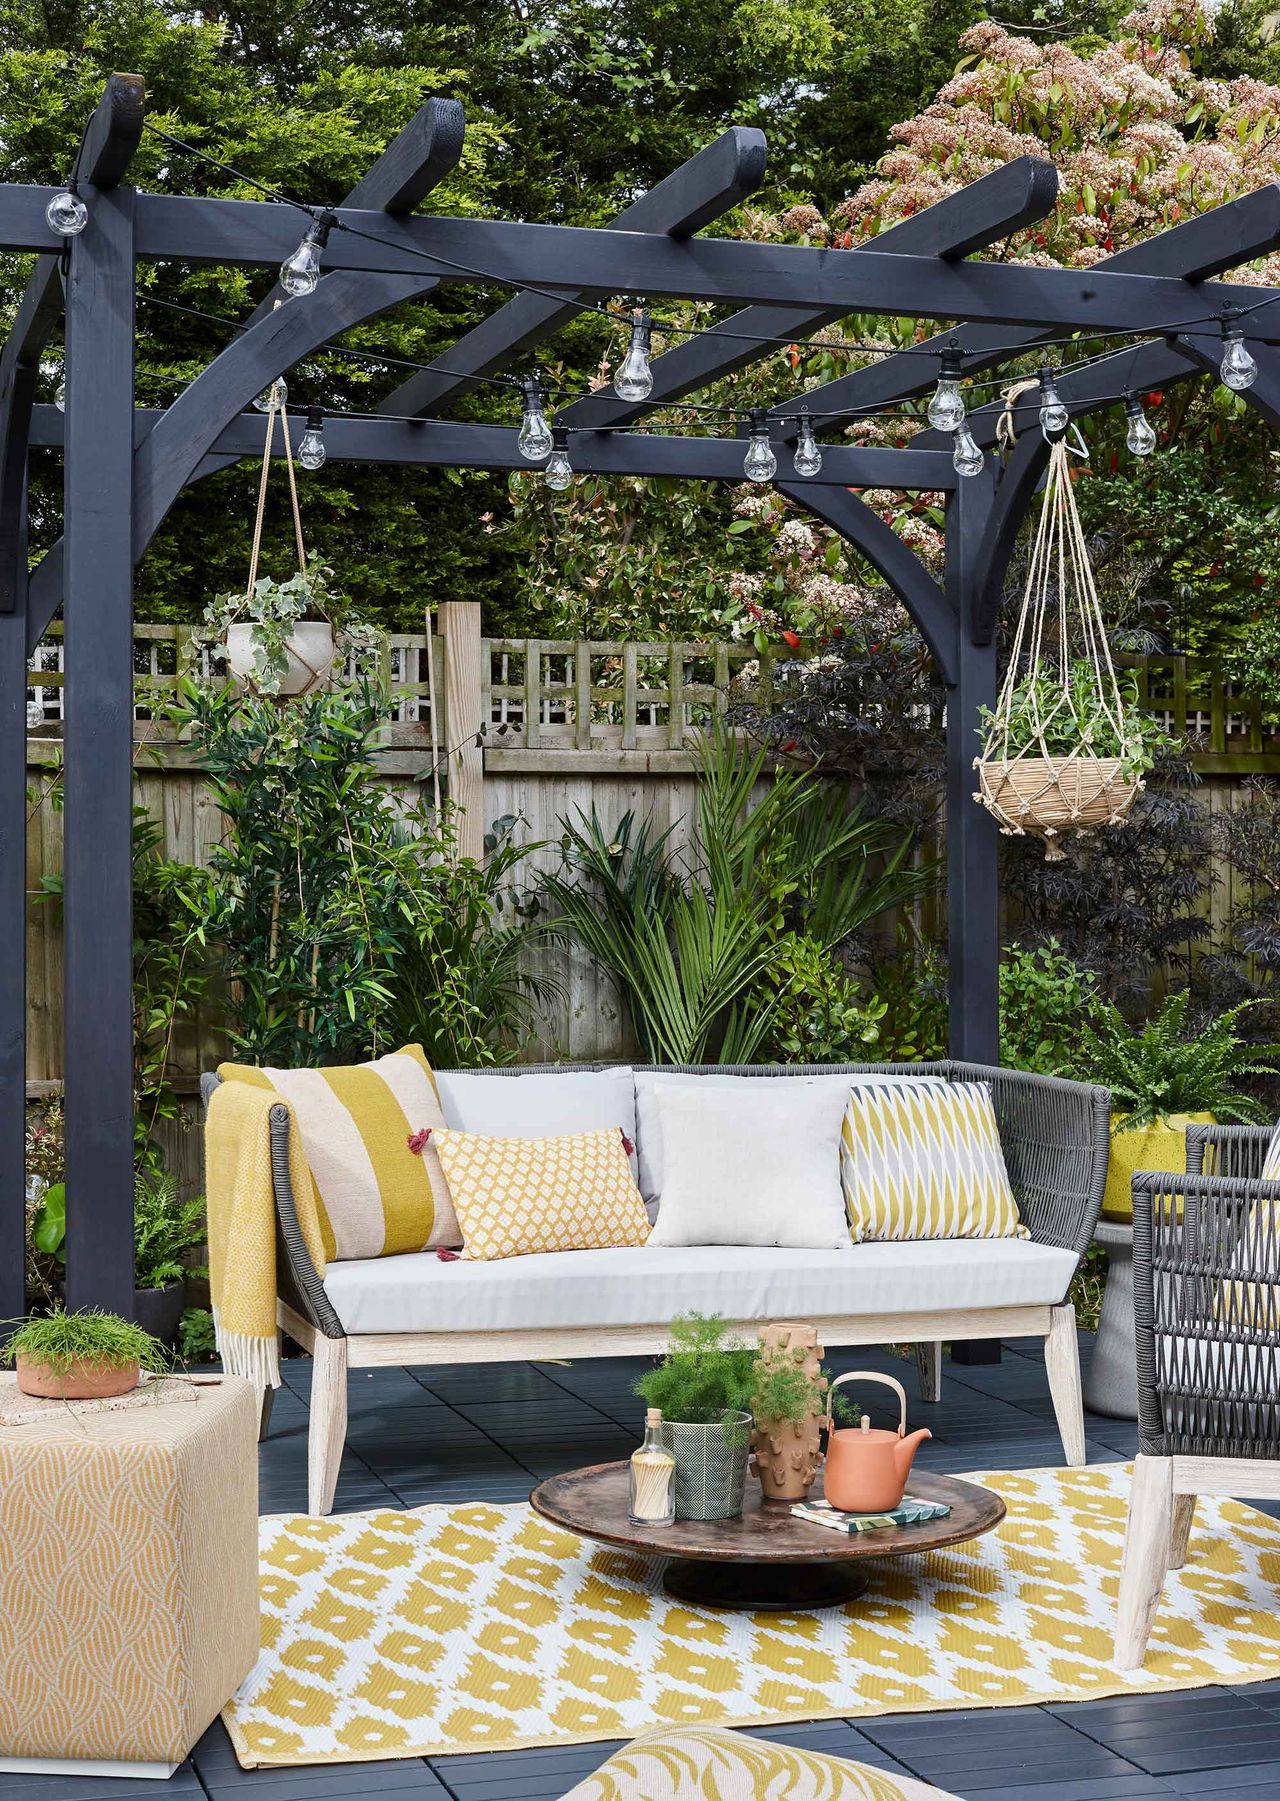 21 stunning Pergola ideas for added style and shade - BlogNews